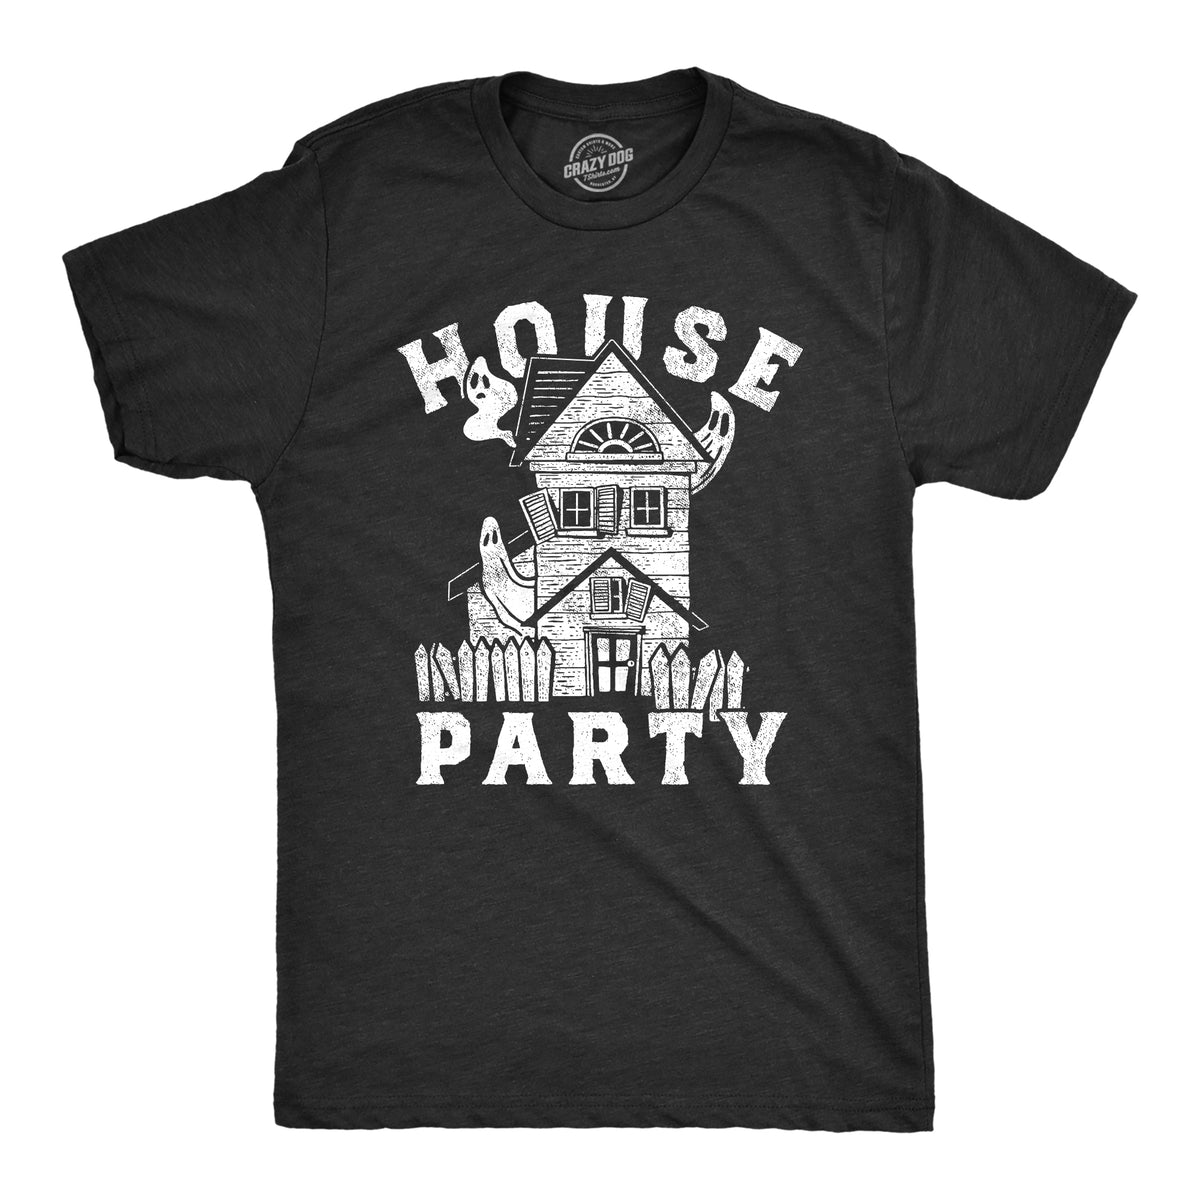 Funny Heather Black - HOUSE House Party Mens T Shirt Nerdy Halloween sarcastic Tee